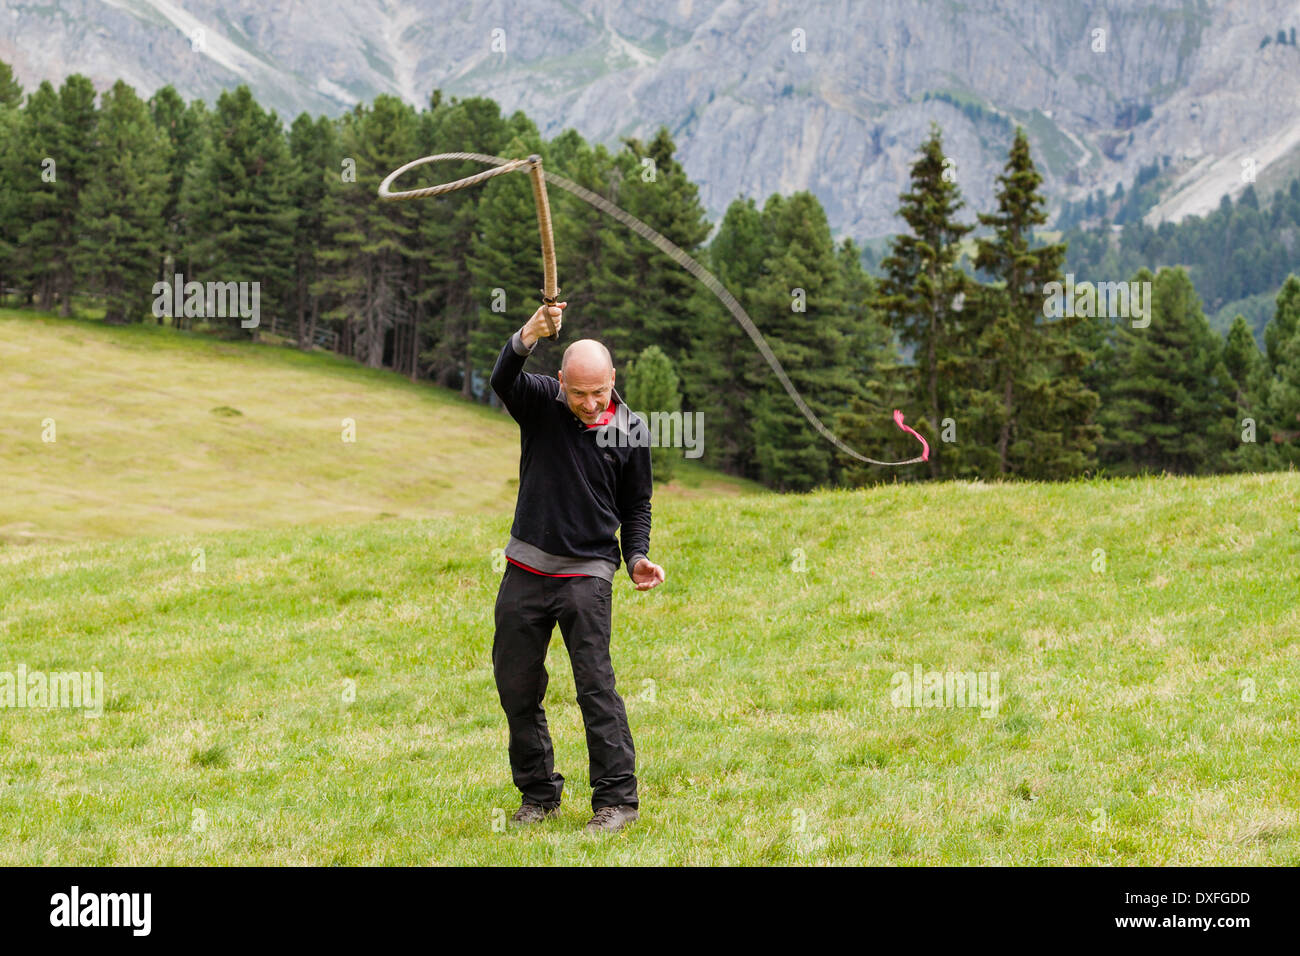 Man whipping in the air as it is custume in the alps Stock Photo